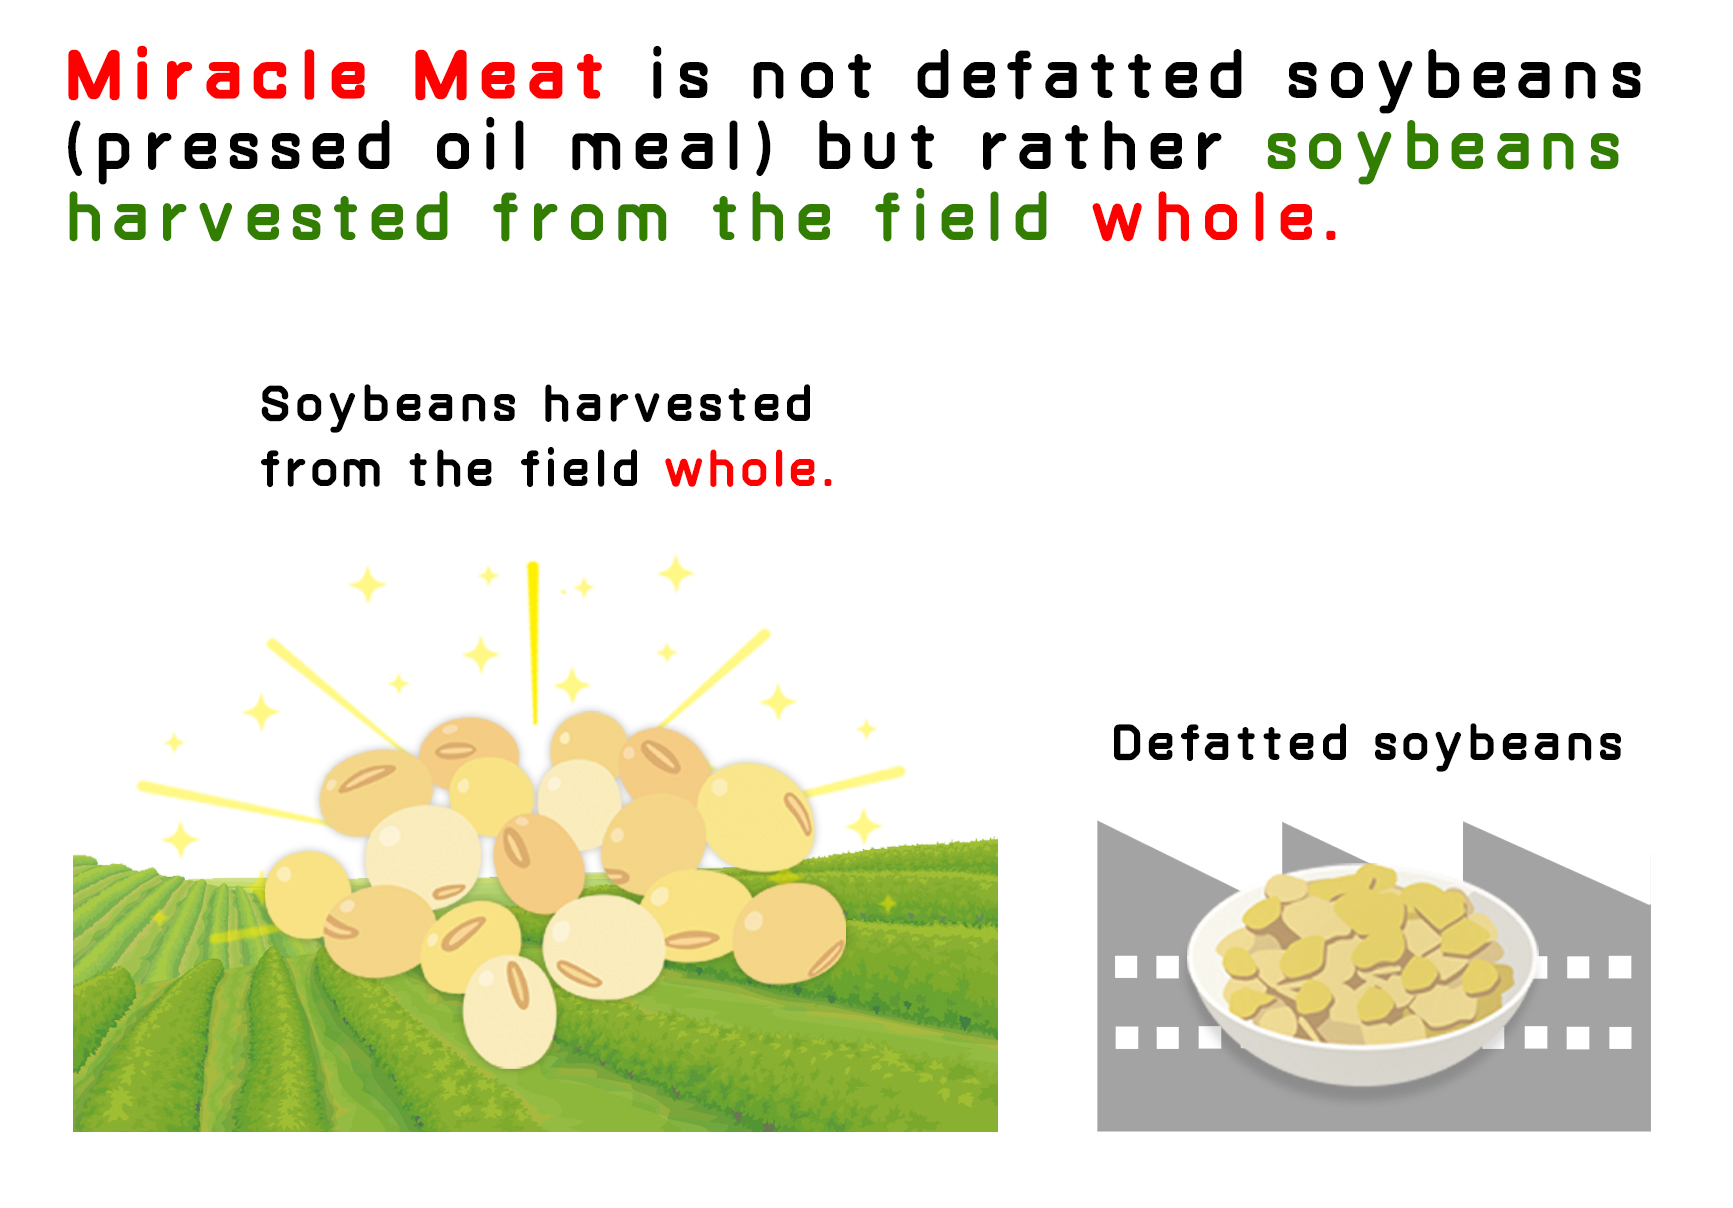 Miracle Meat is not defatted soybeans (pressed oil meal) but rather soybeans harvested from the field whole.